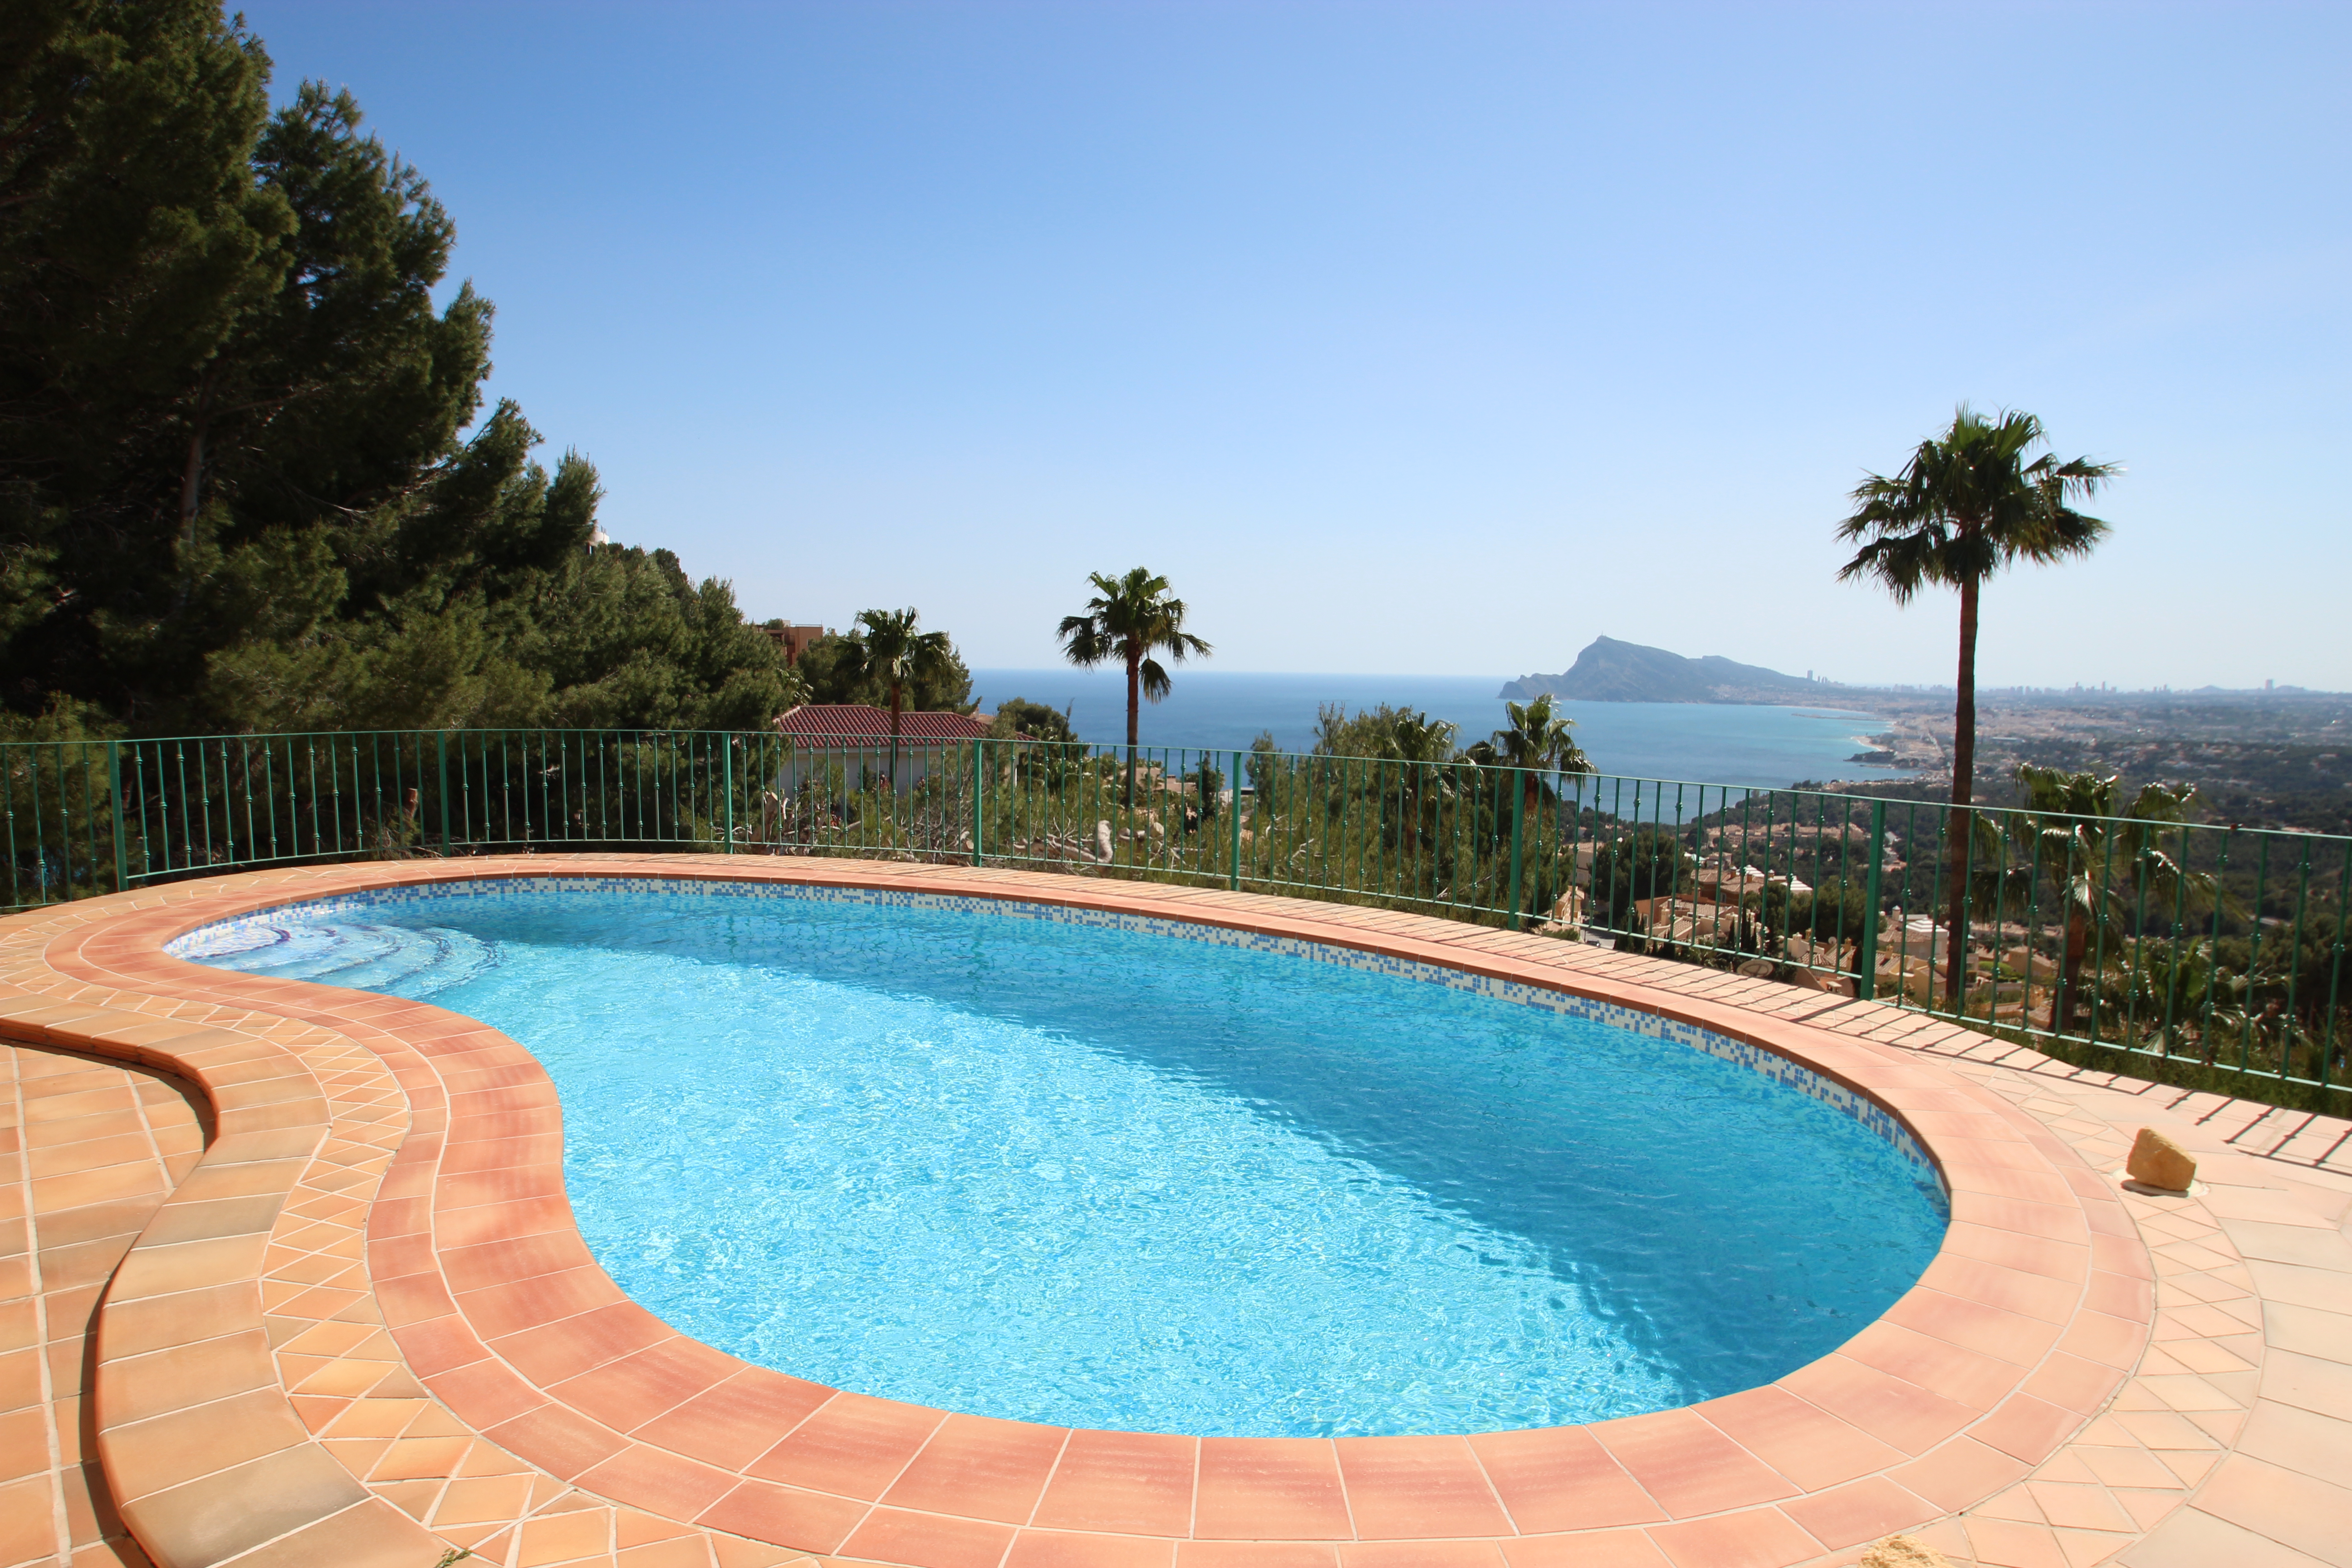 Villa in Altea-Hills with spectacular sea views. Property with 4 bedrooms and 3 bathrooms, with gas heating, air conditioning, closed garage and private pool